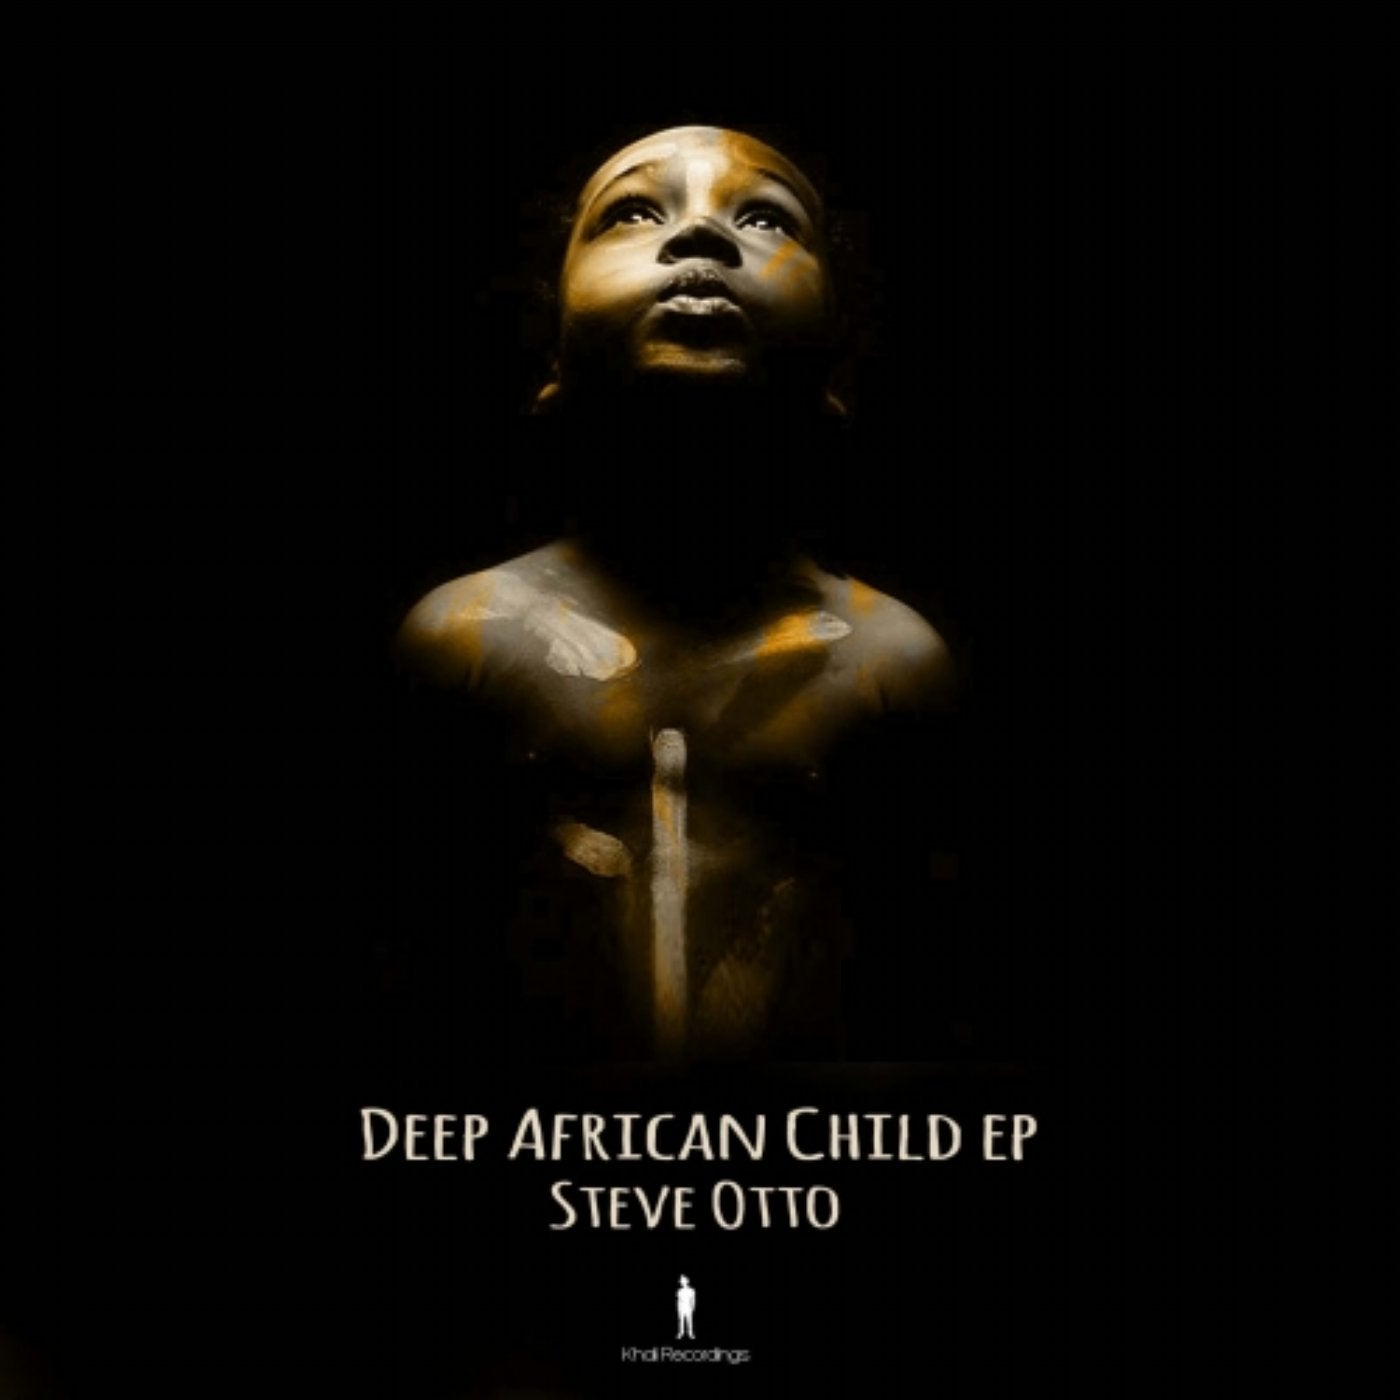 Deep African Child EP